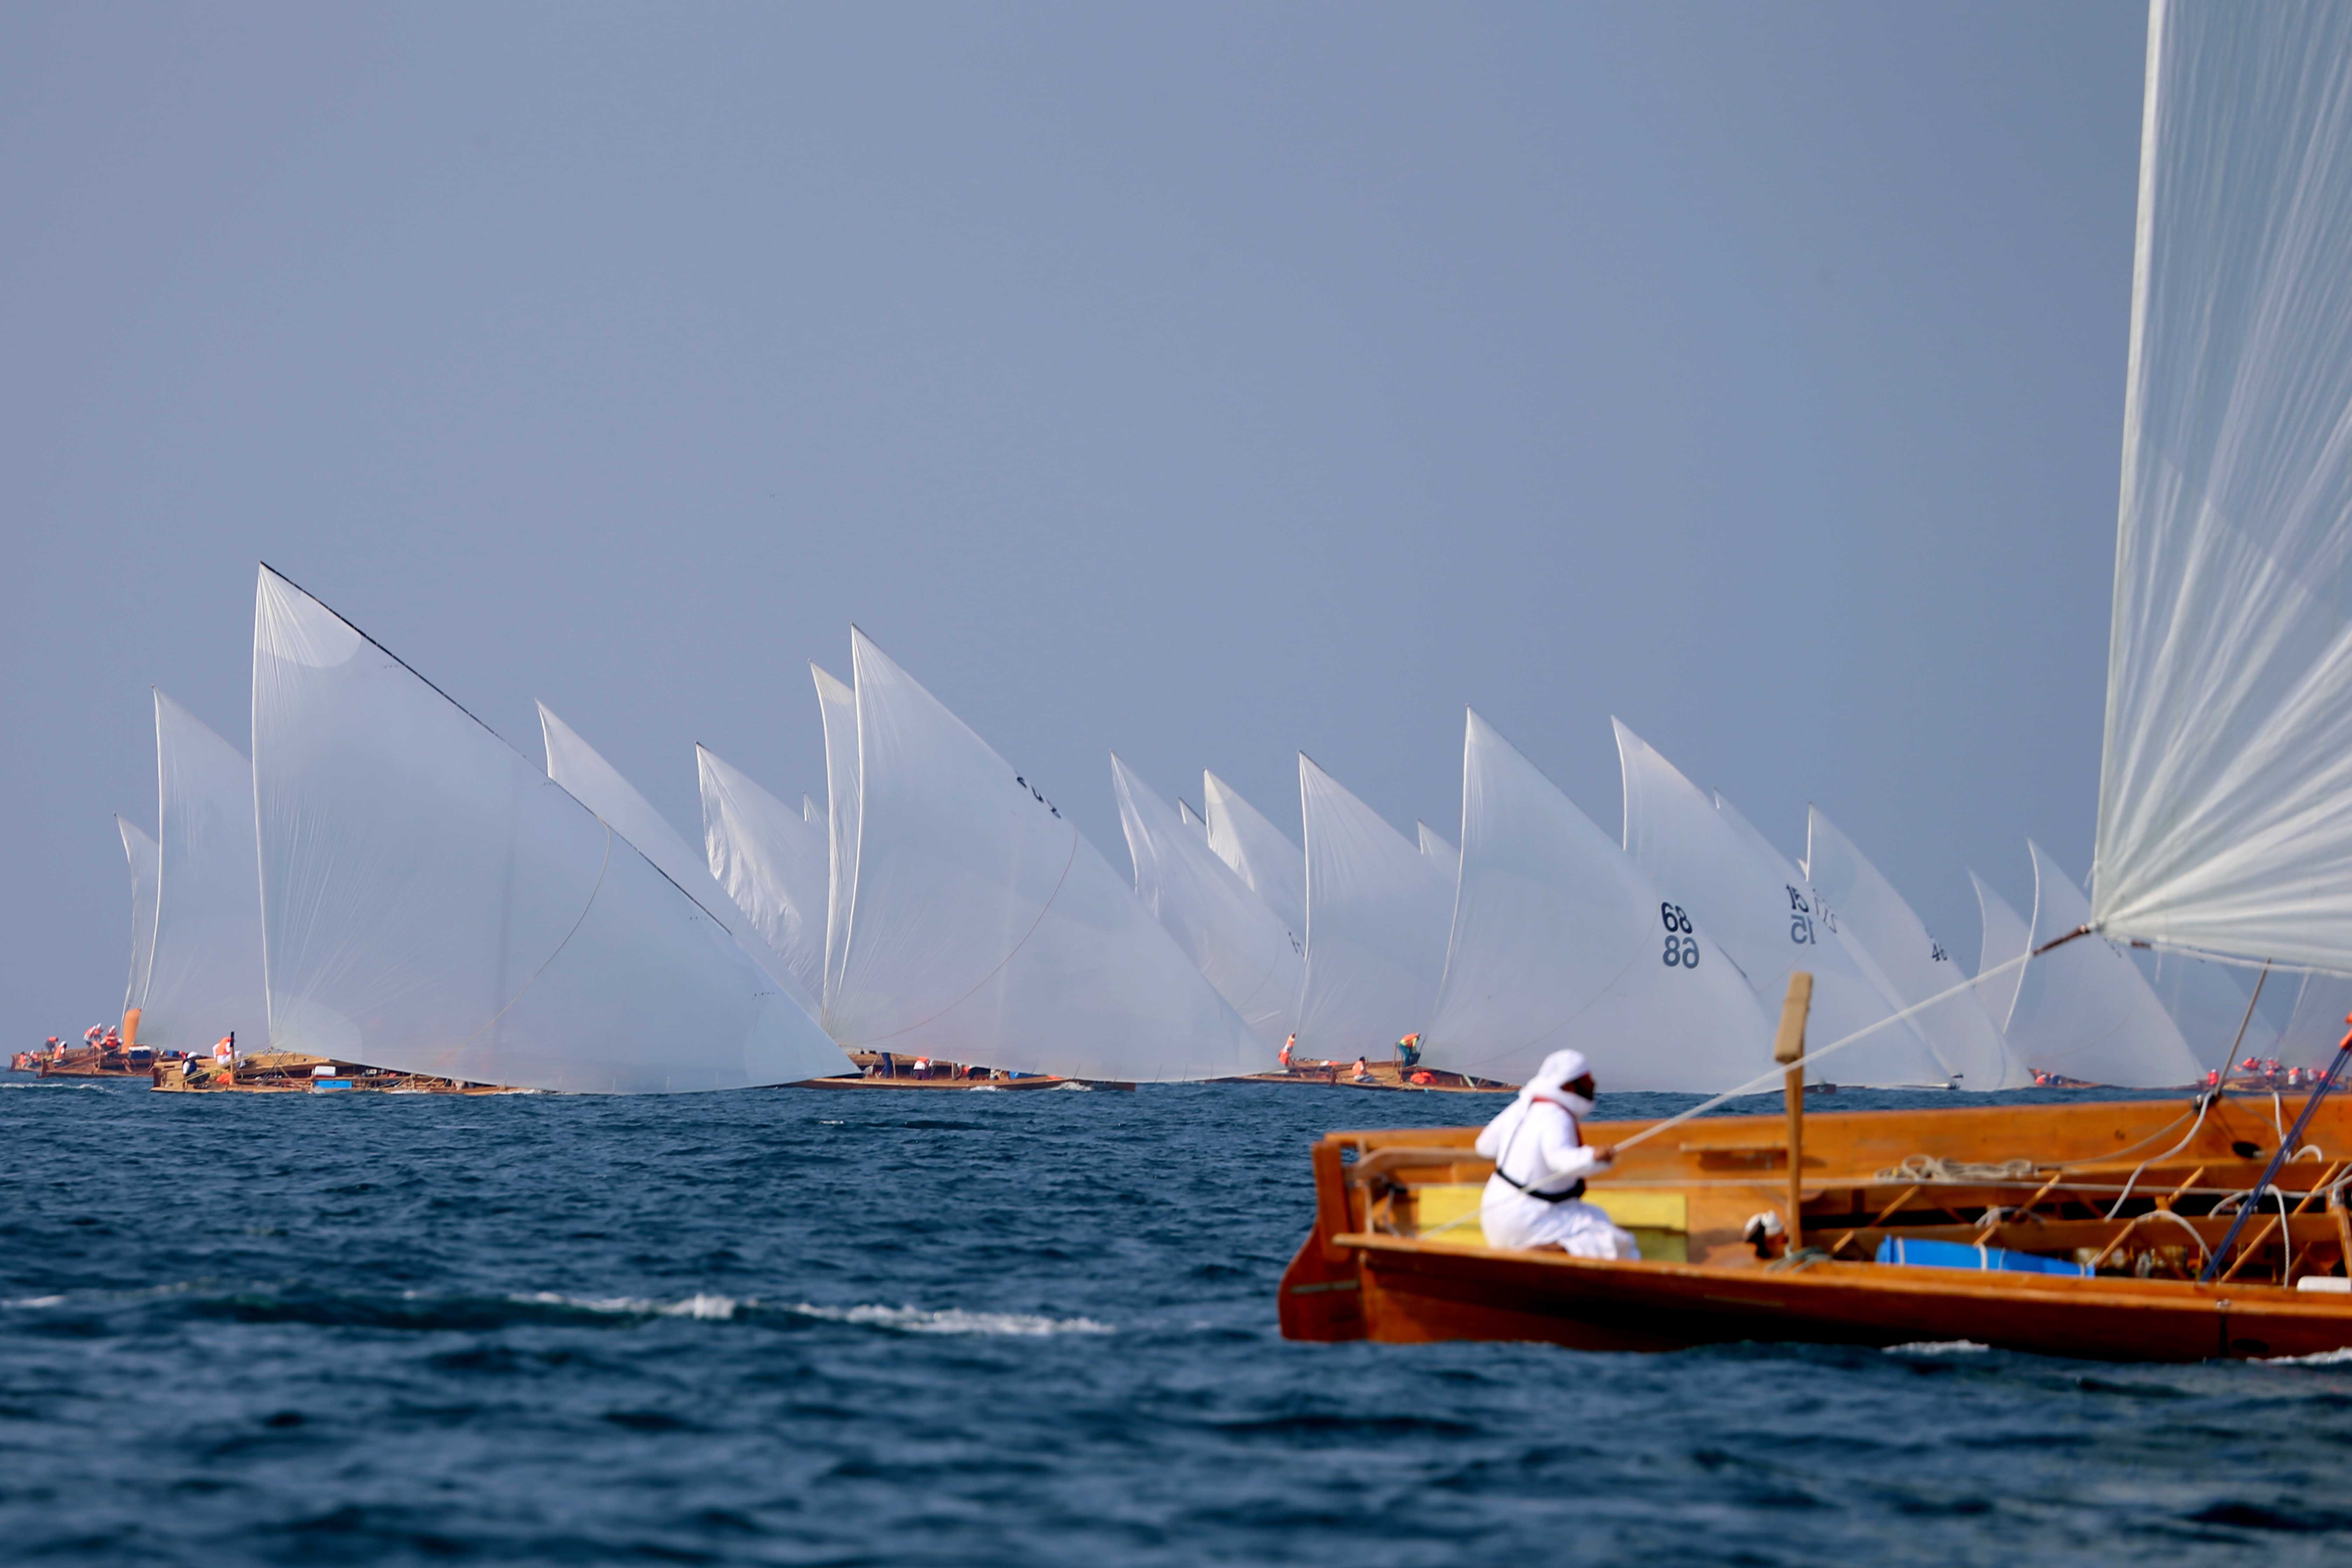 74 Boats Competing in the First Round of 43ft Dhow Sailing Race Today -Saturday-